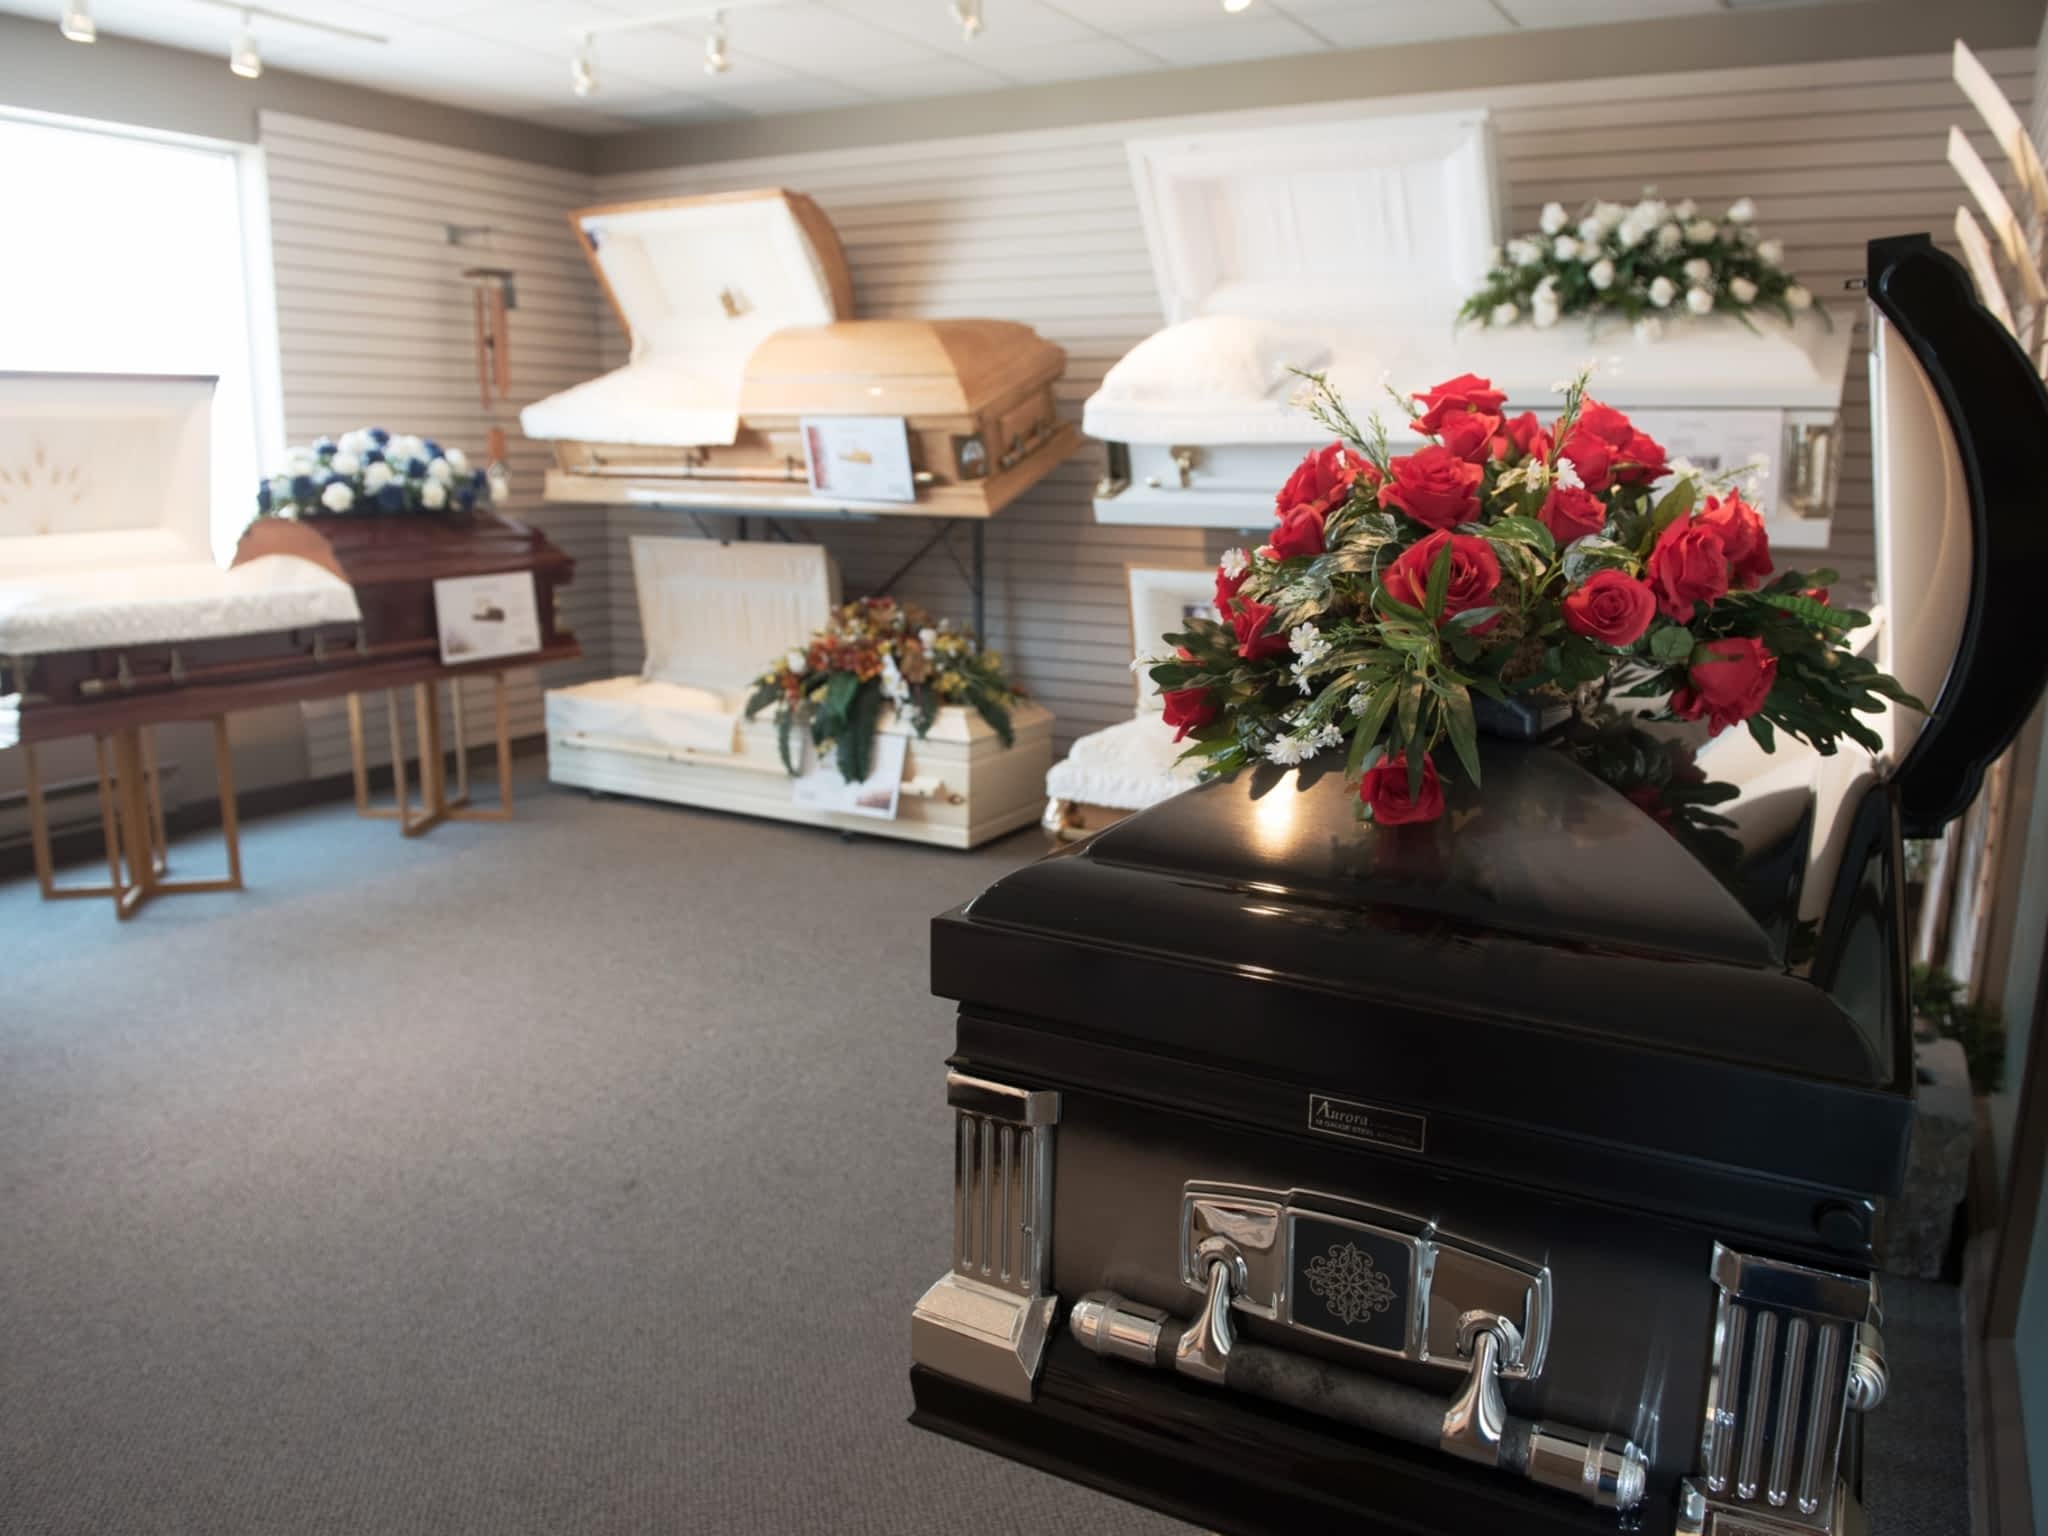 Burbage funeral home snow hill md